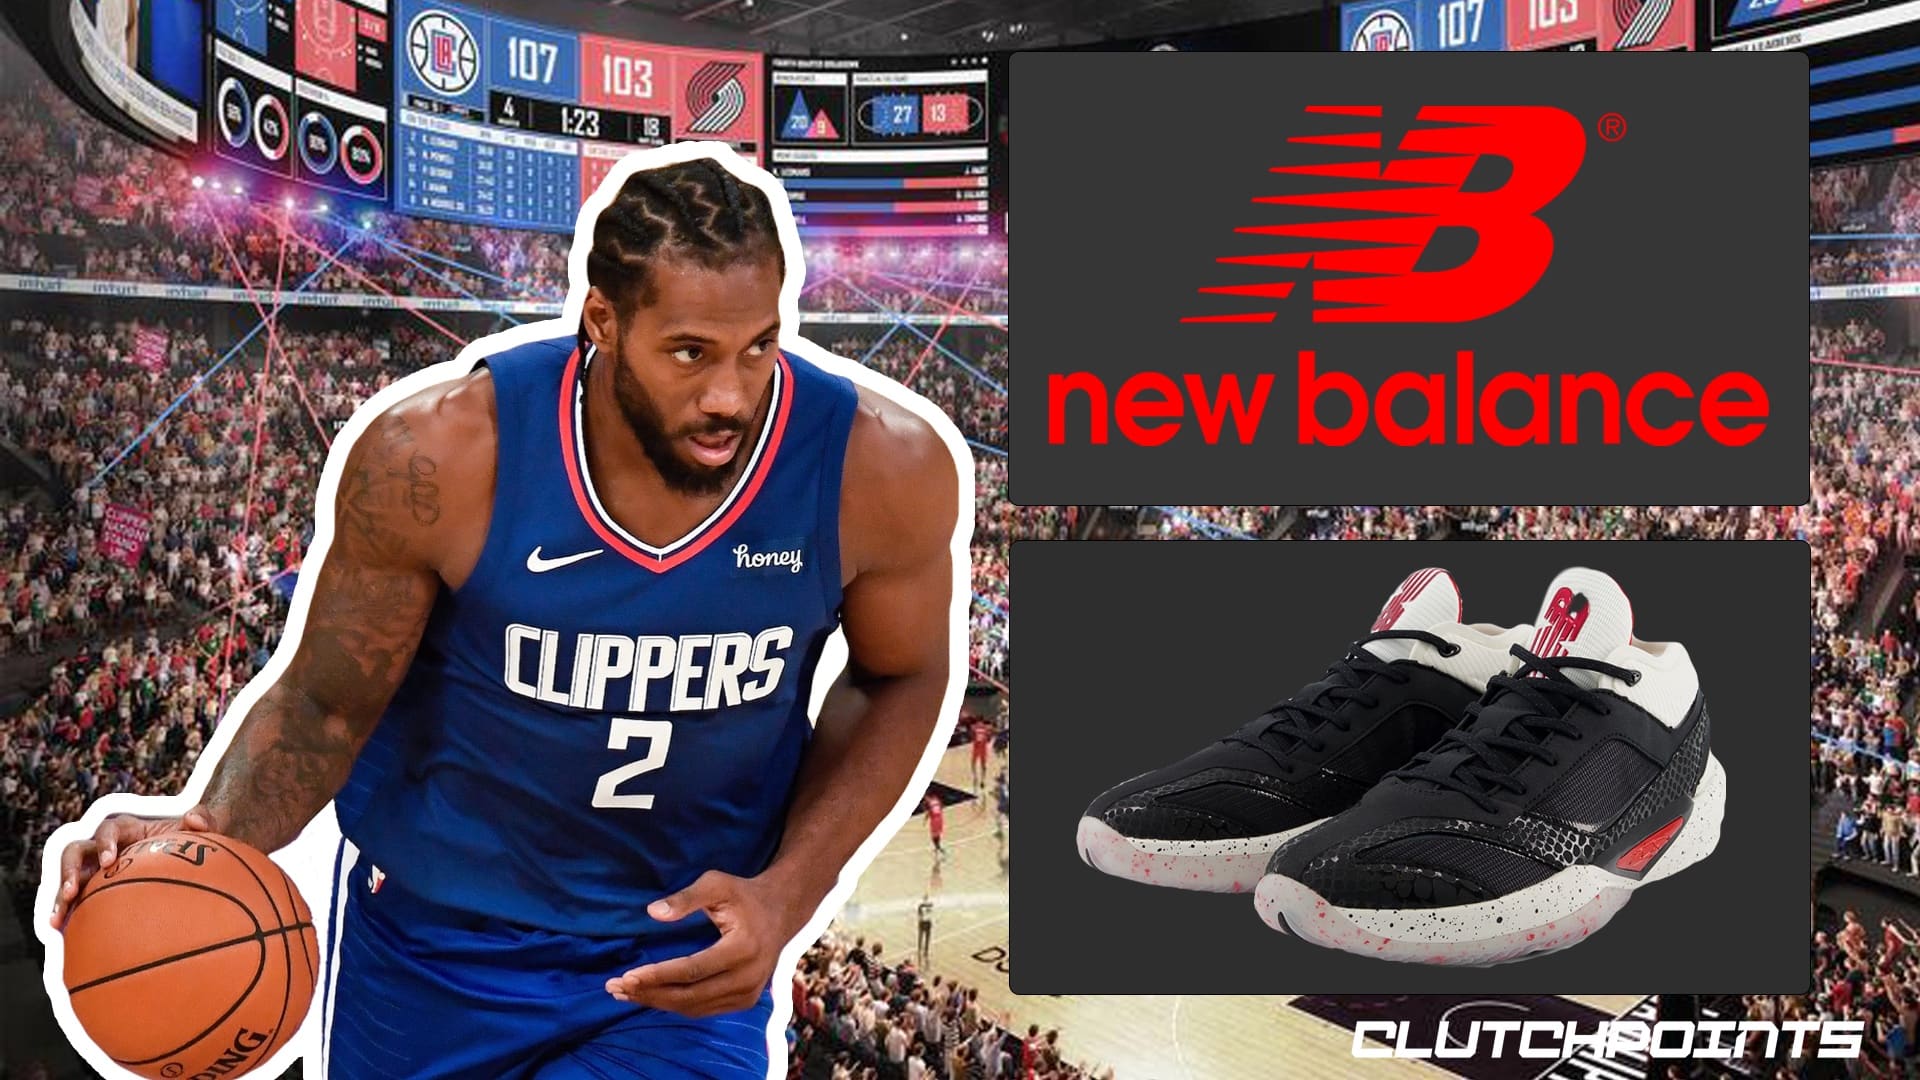 Clippers News: Paul George, Kawhi Leonard unveil new signature sneakers -  Clips Nation